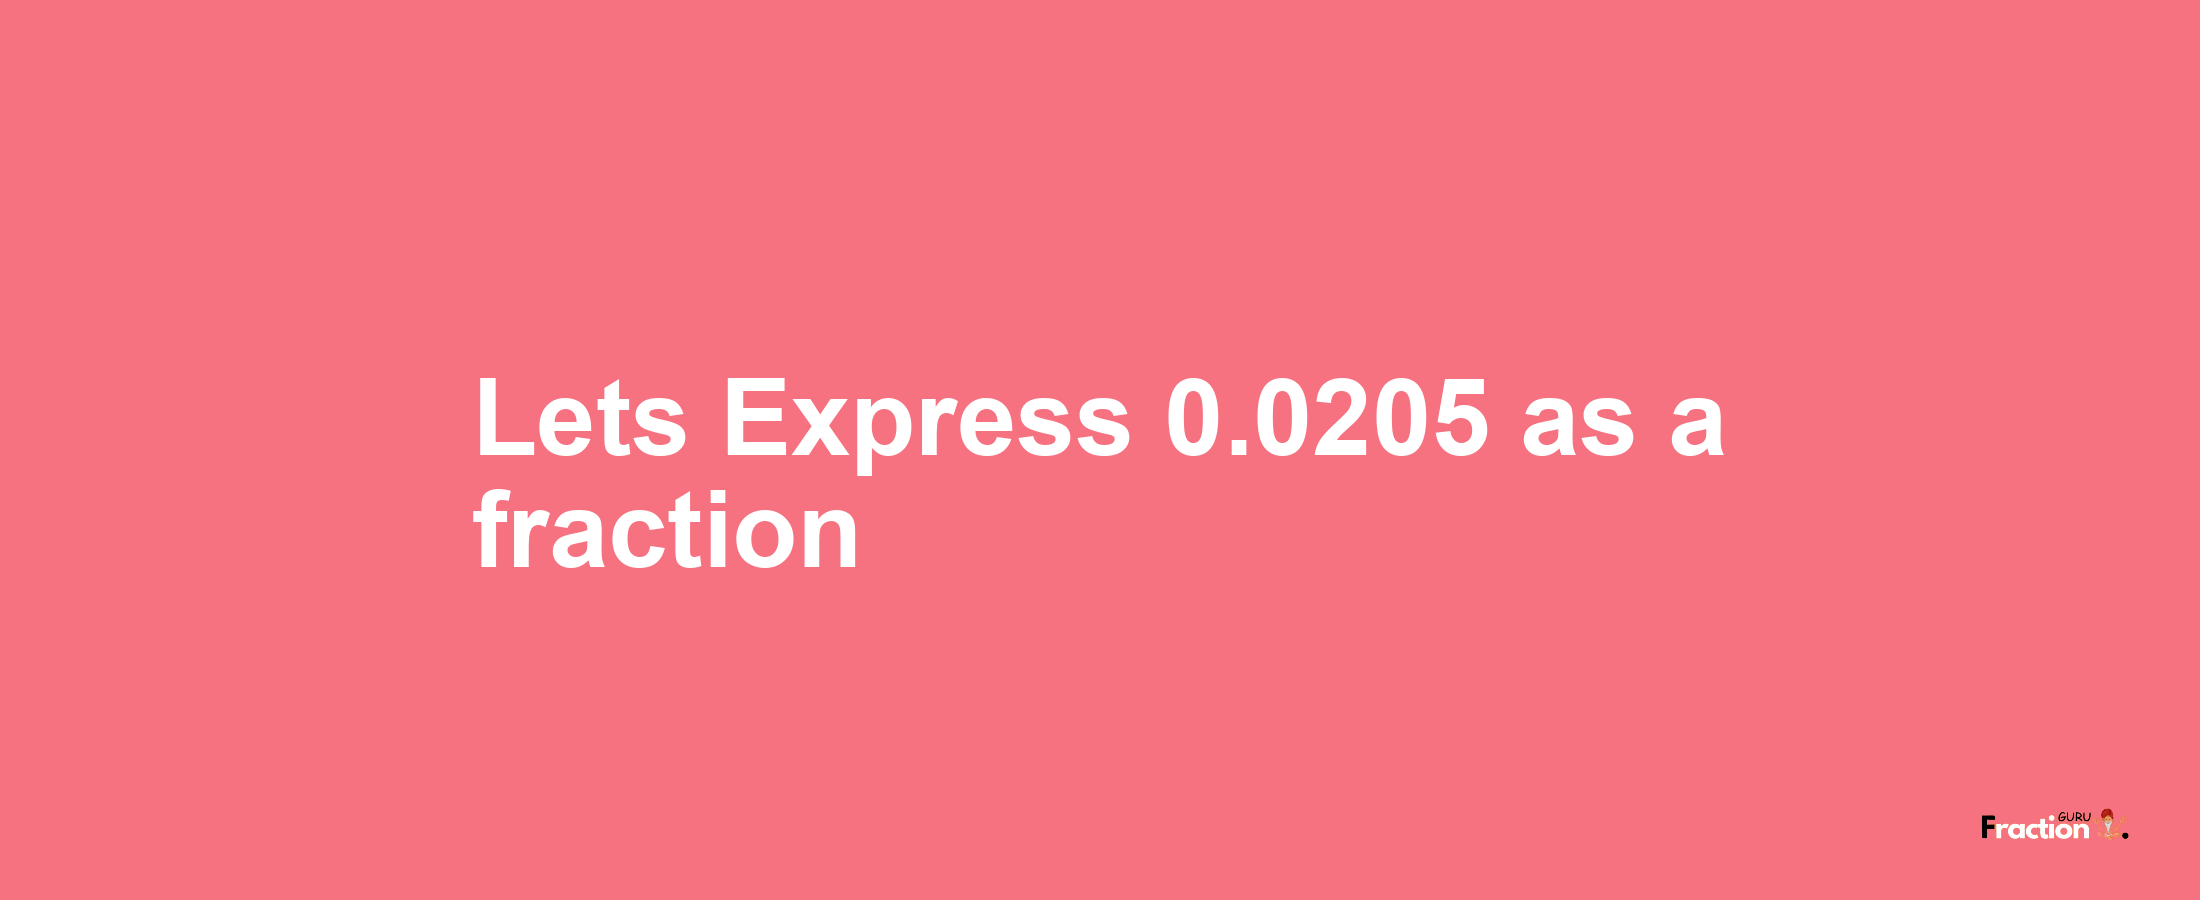 Lets Express 0.0205 as afraction